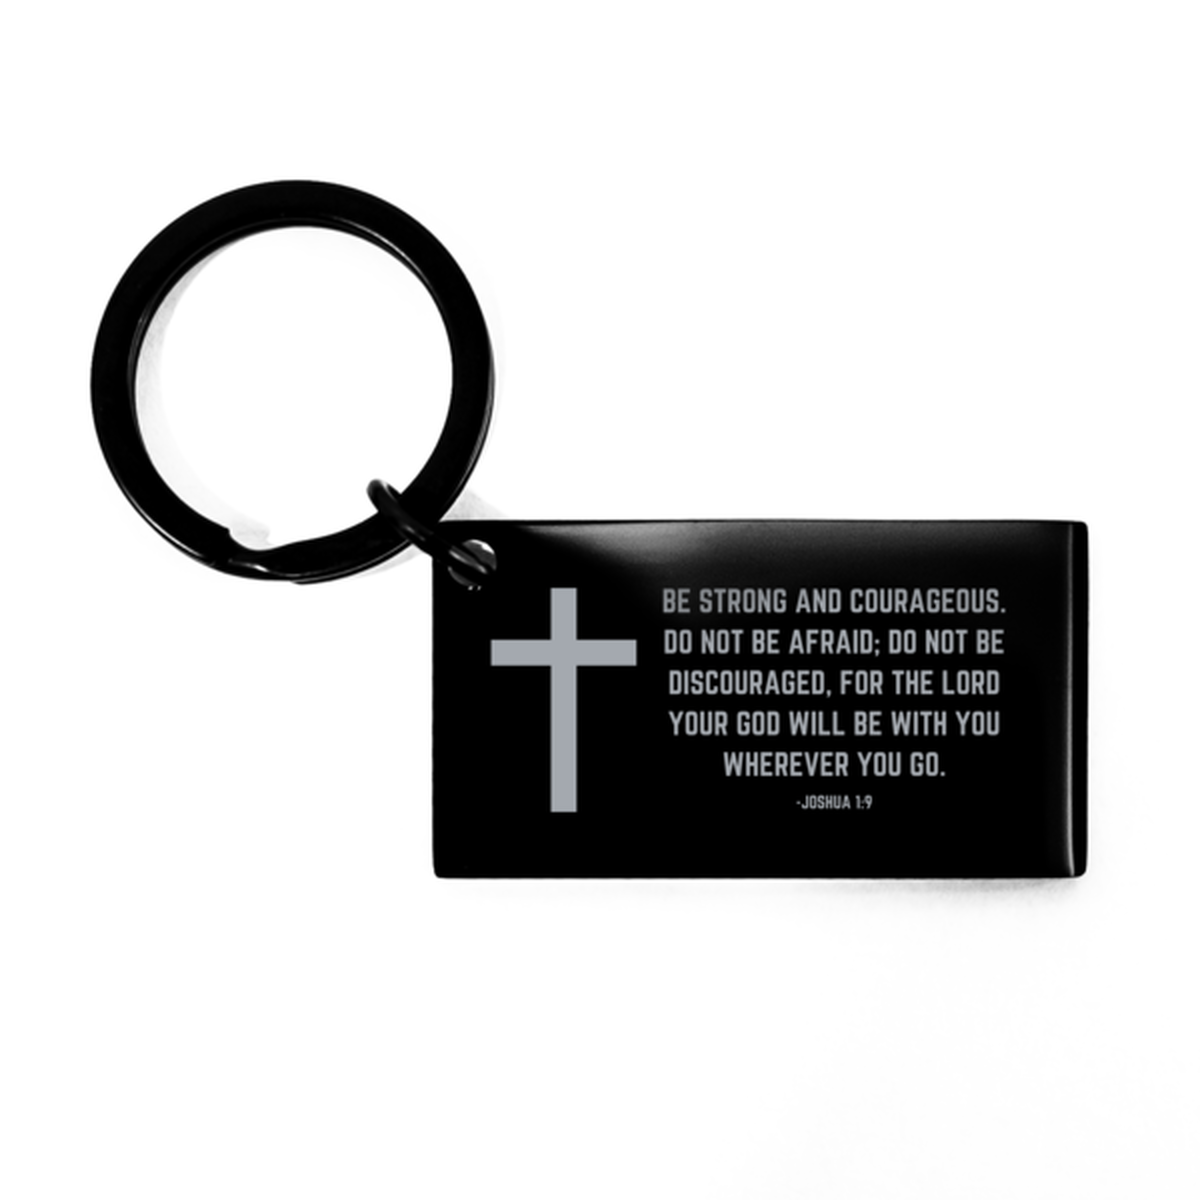 Baptism Gifts For Teenage Boys Girls, Christian Bible Verse Black Keychain, For the lord your God will be with you, Confirmation Gifts, Bible Verse Keyring for Son, Godson, Grandson, Nephew